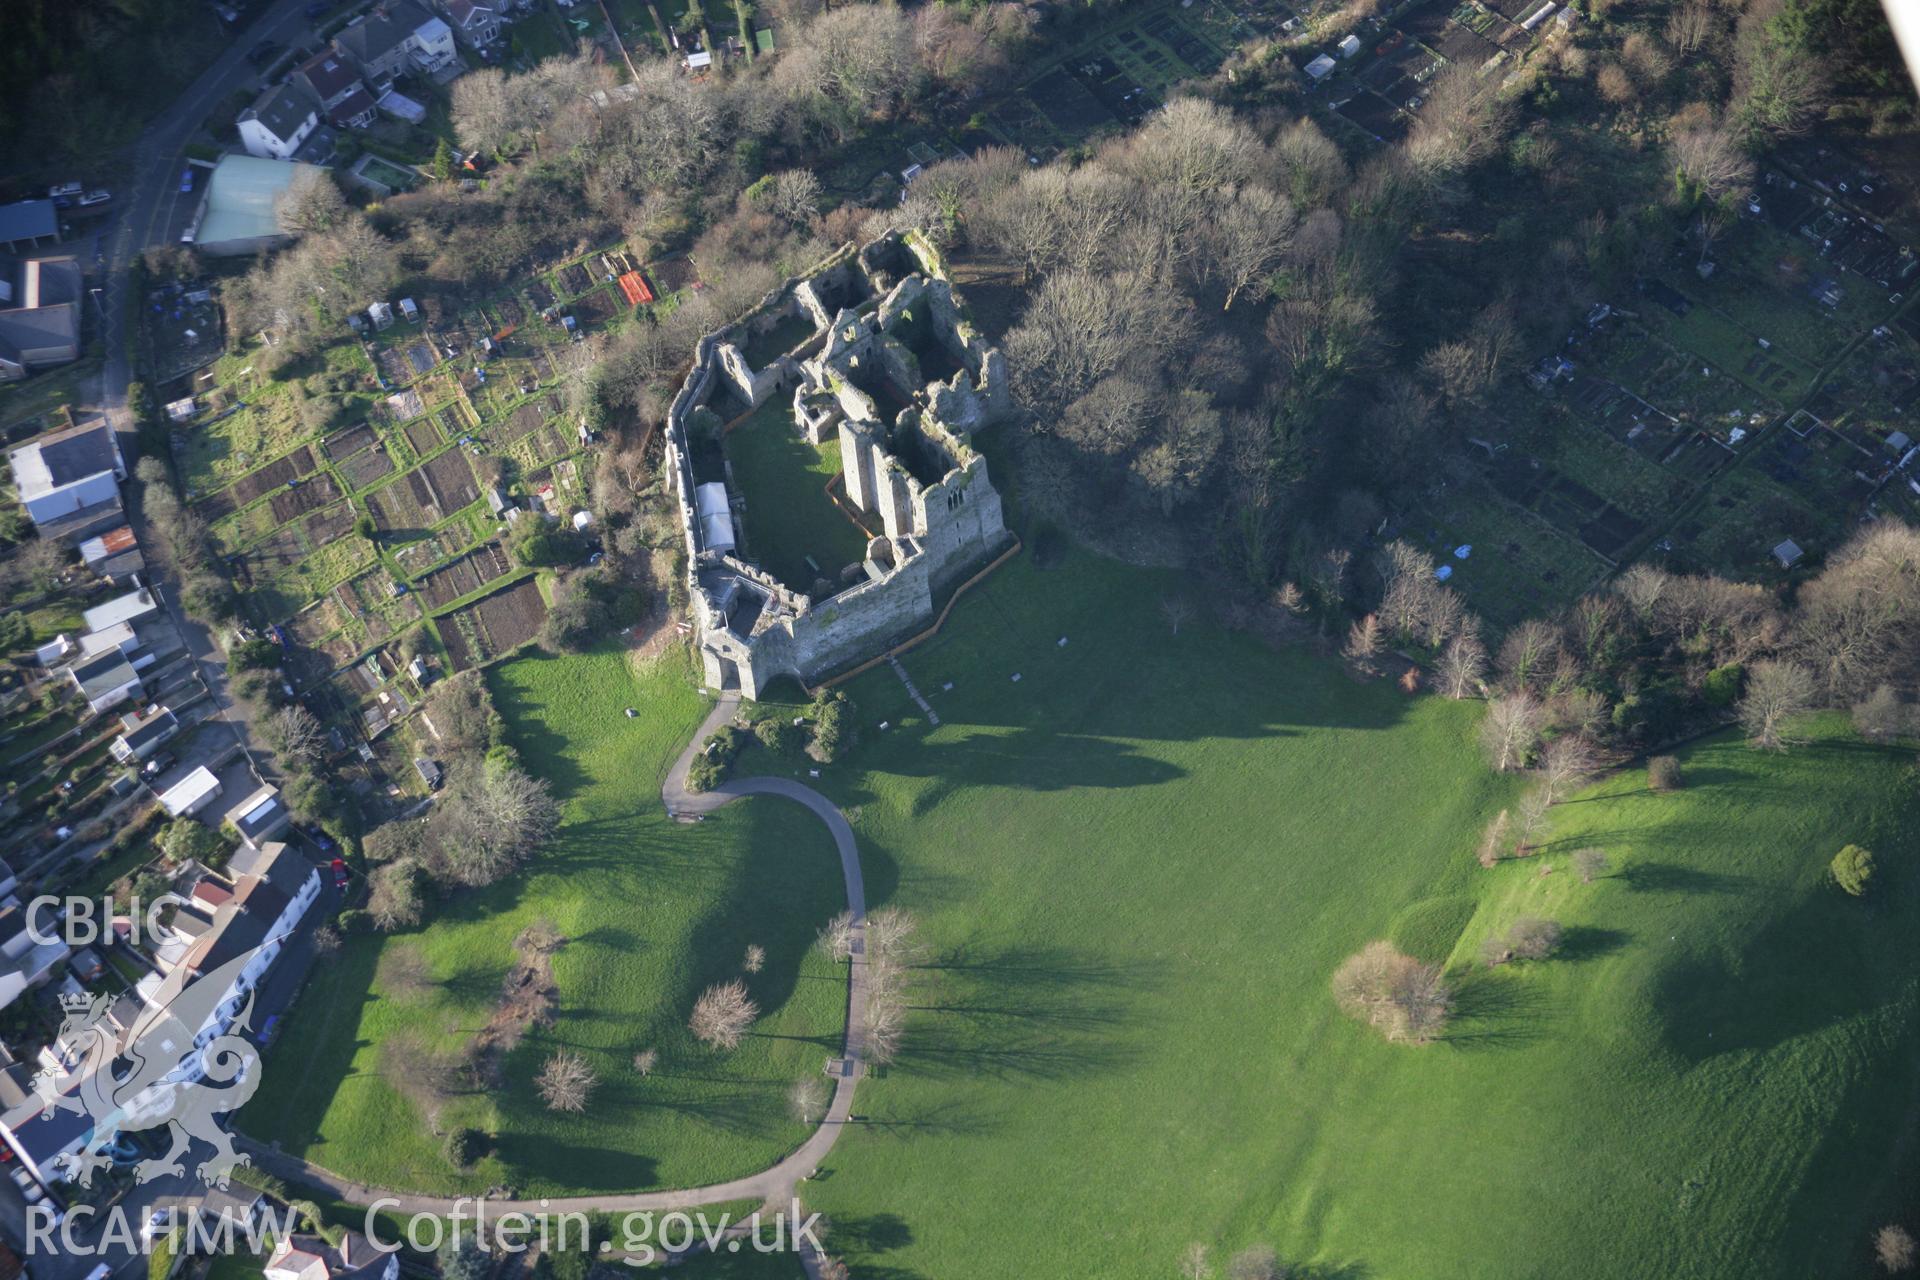 RCAHMW colour oblique aerial photograph of Oystermouth Castle, viewed from the east. Taken on 26 January 2006 by Toby Driver.